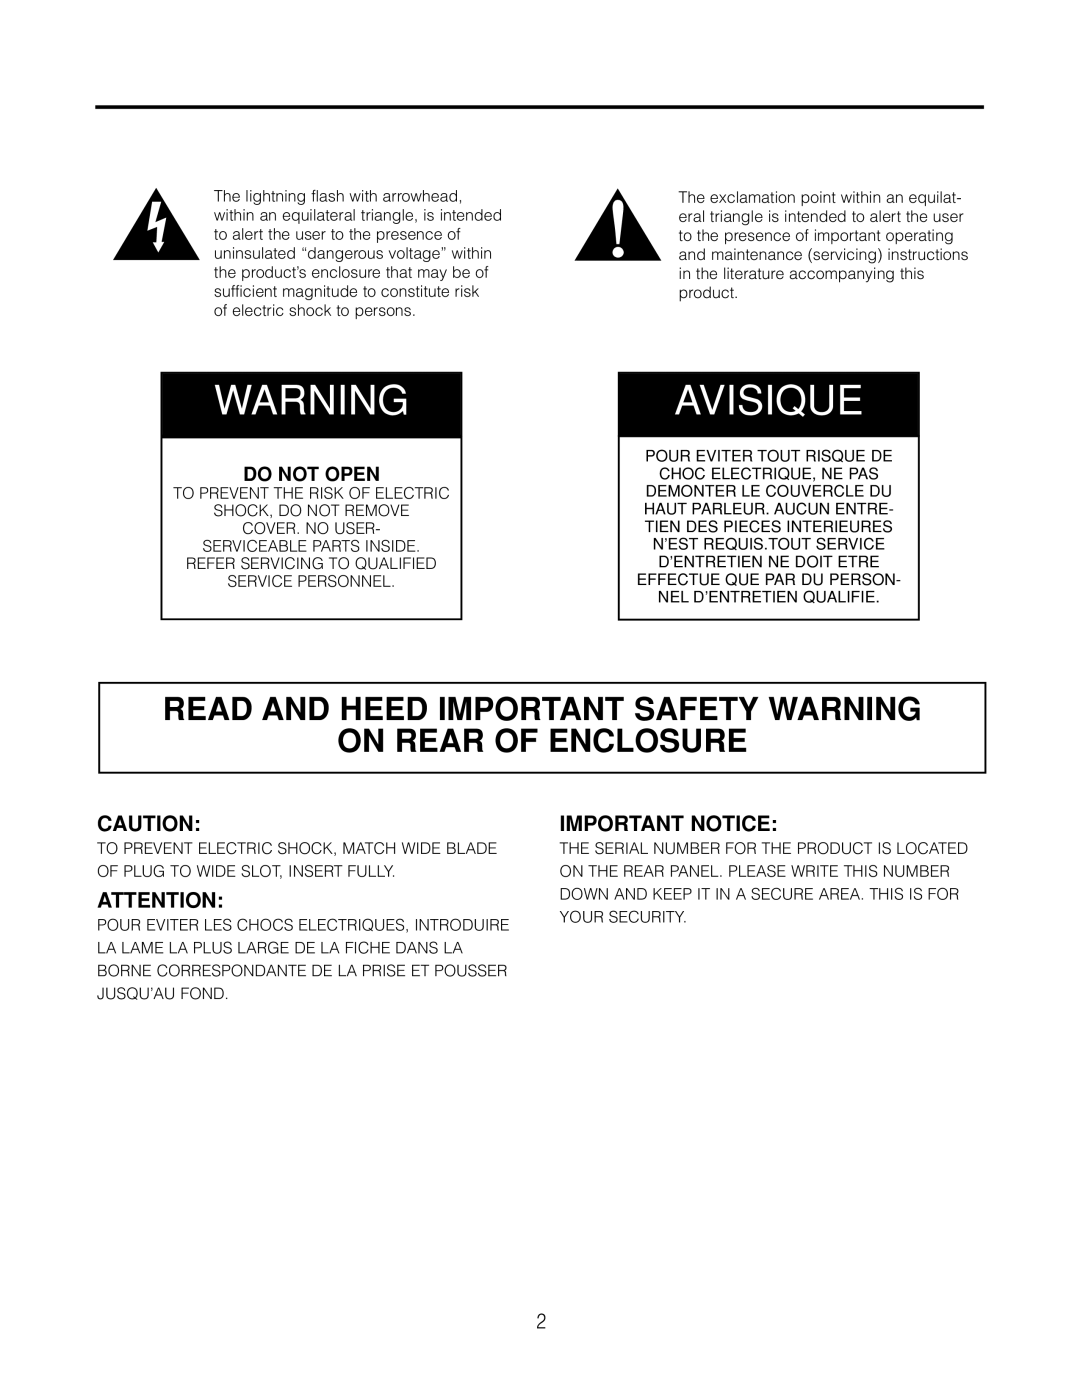 Cambridge SoundWorks AVS550 Read And Heed Important Safety Warning, On Rear Of Enclosure, Avisique, Important Notice 